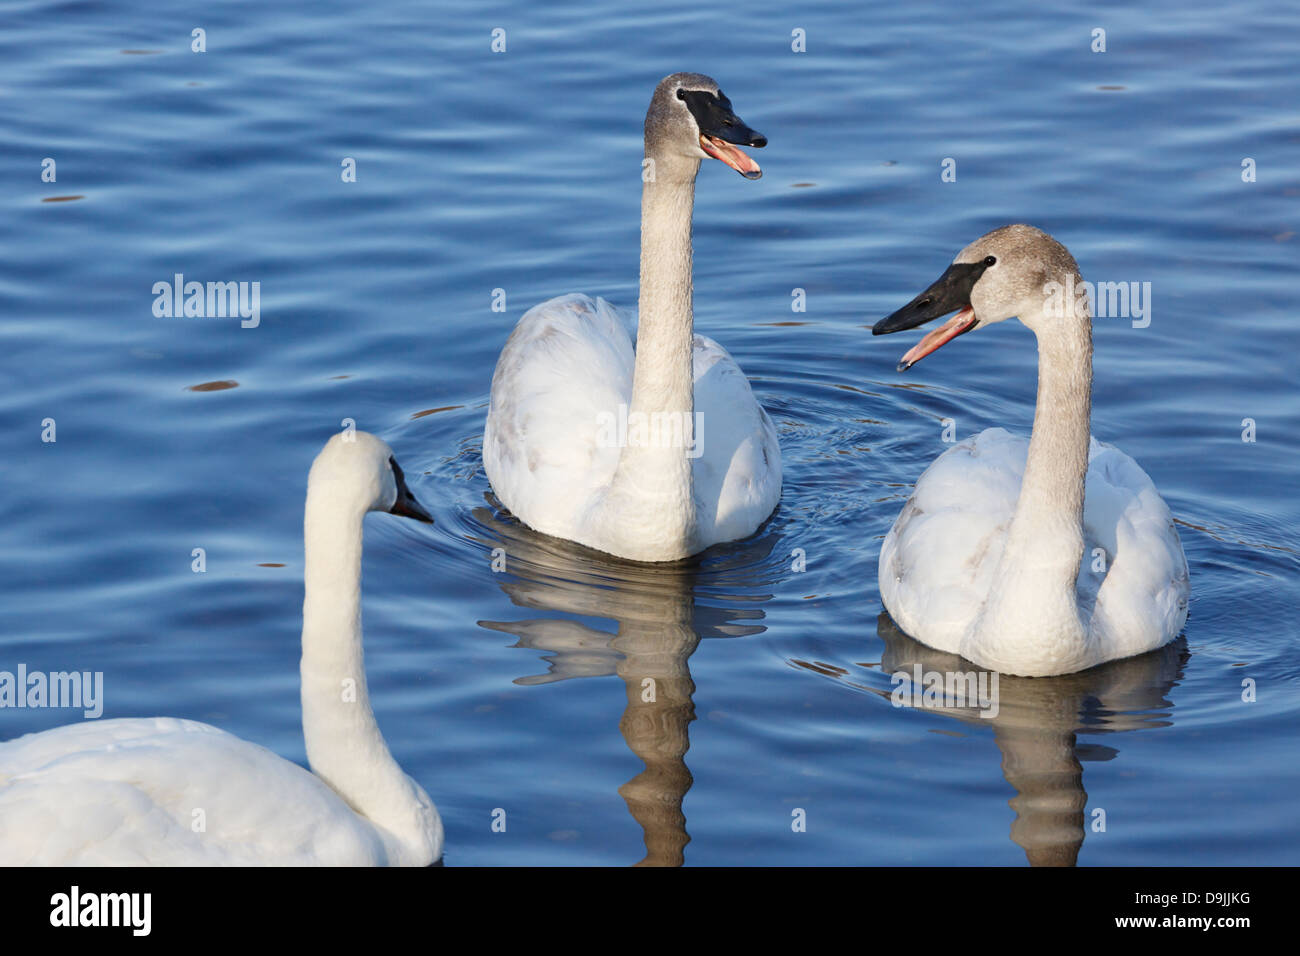 Trumpeter swans honking on the Mississippi River - Minnesota, USA. Stock Photo